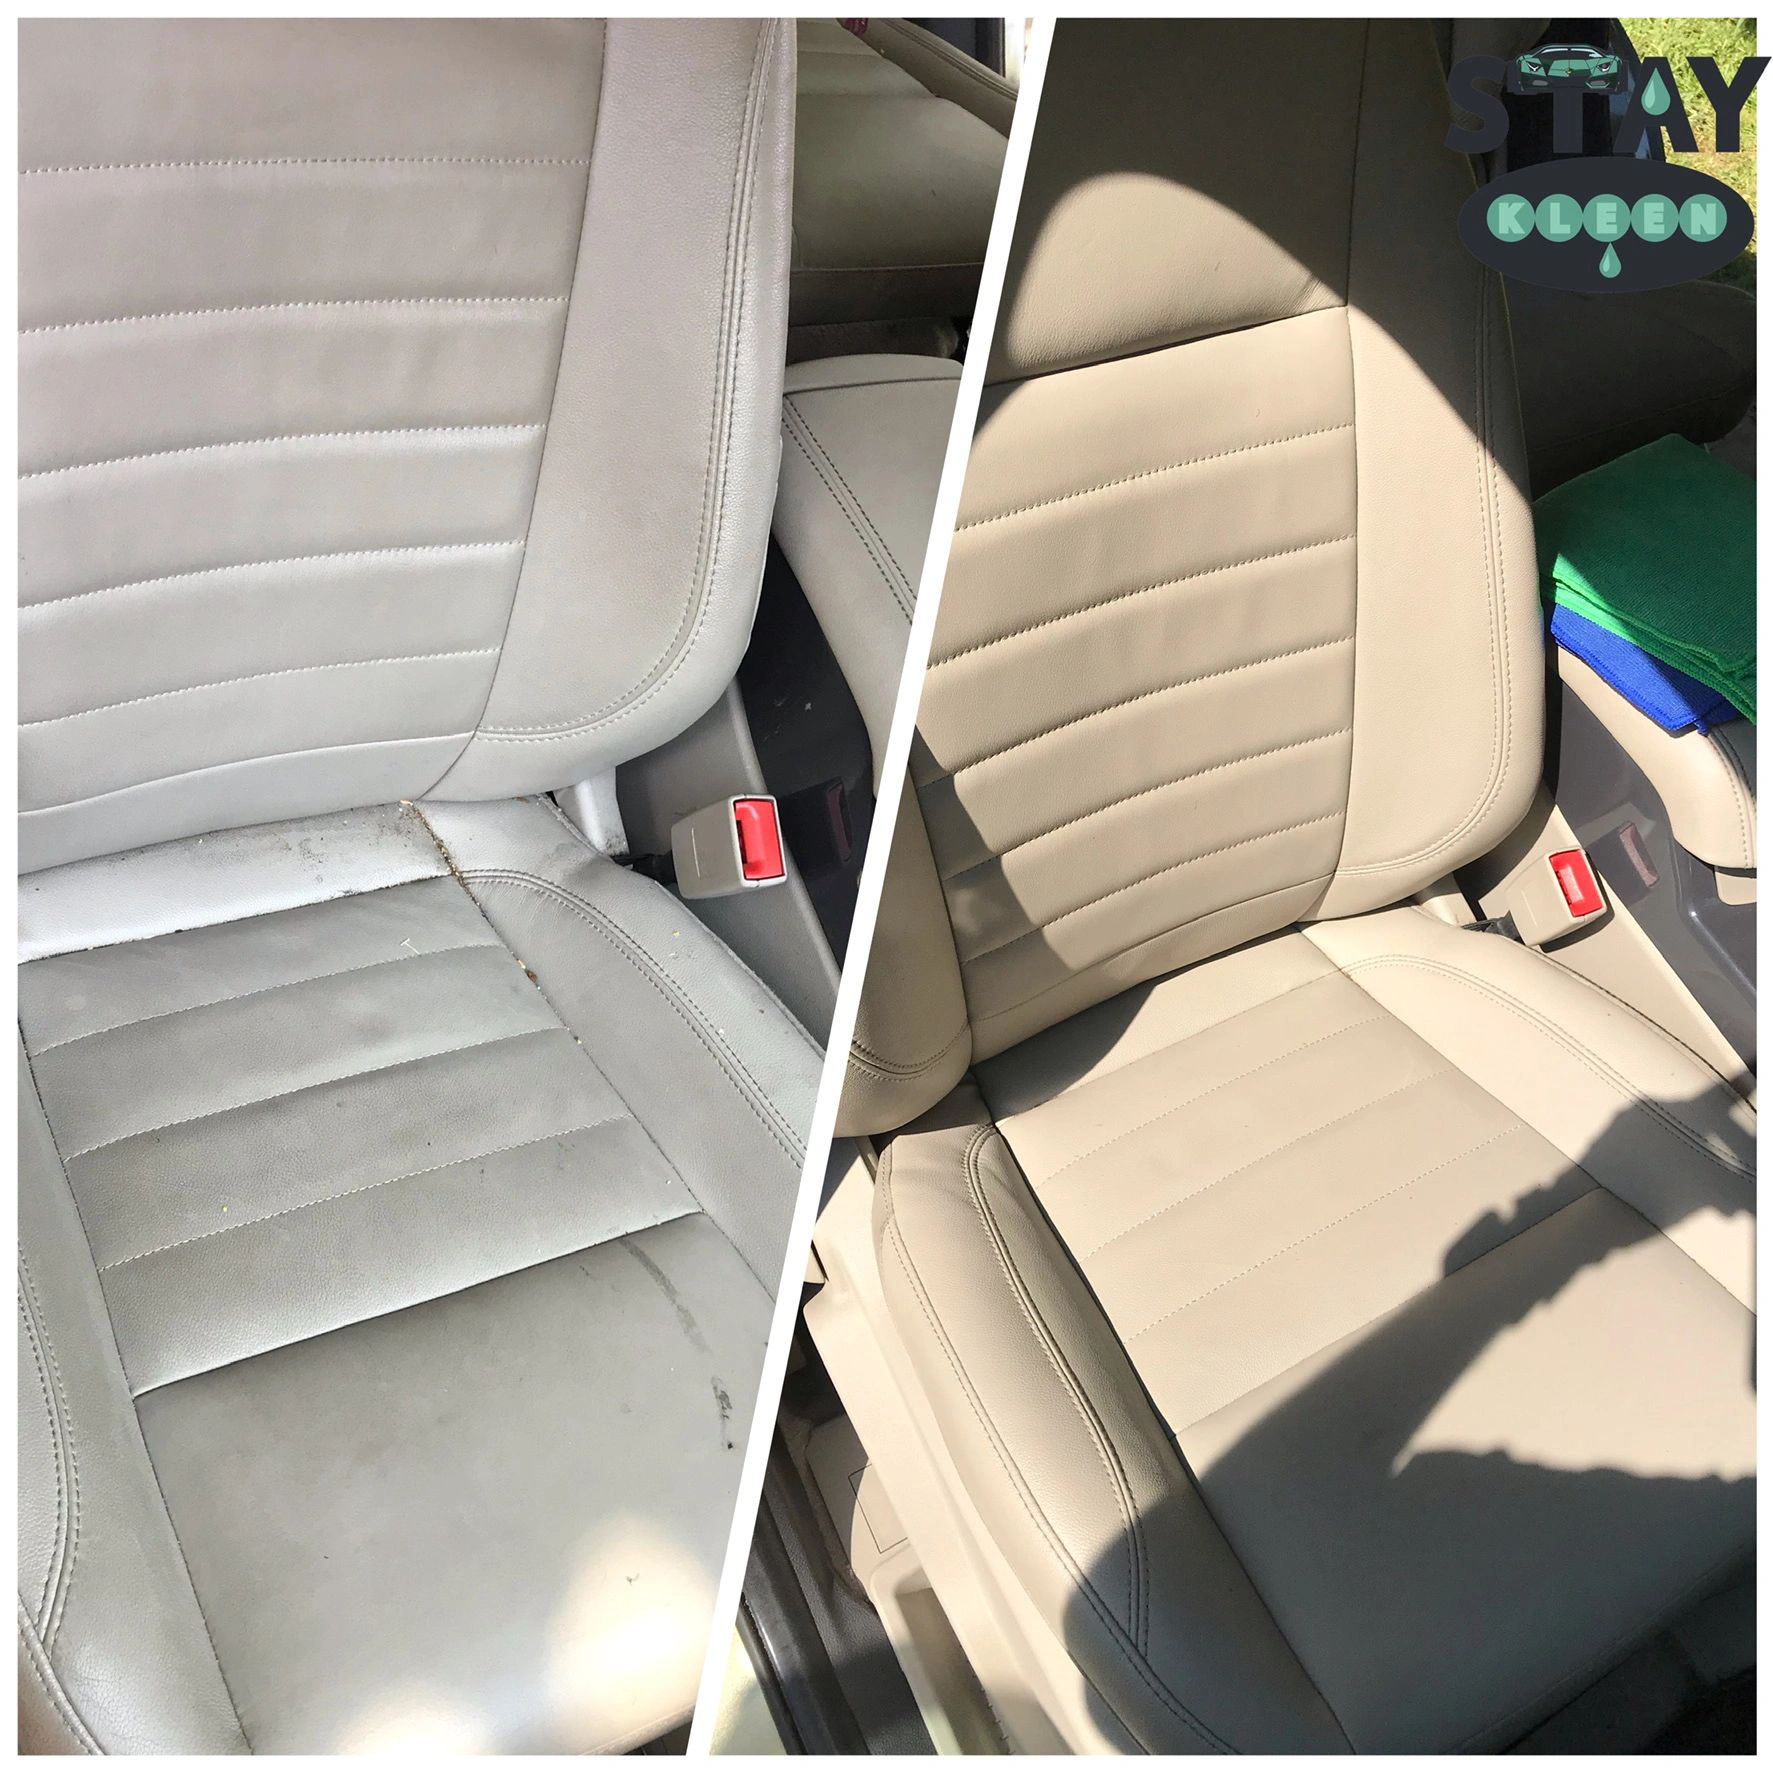 Ford Escape Before & After Leather seats cleaned and conditioned 